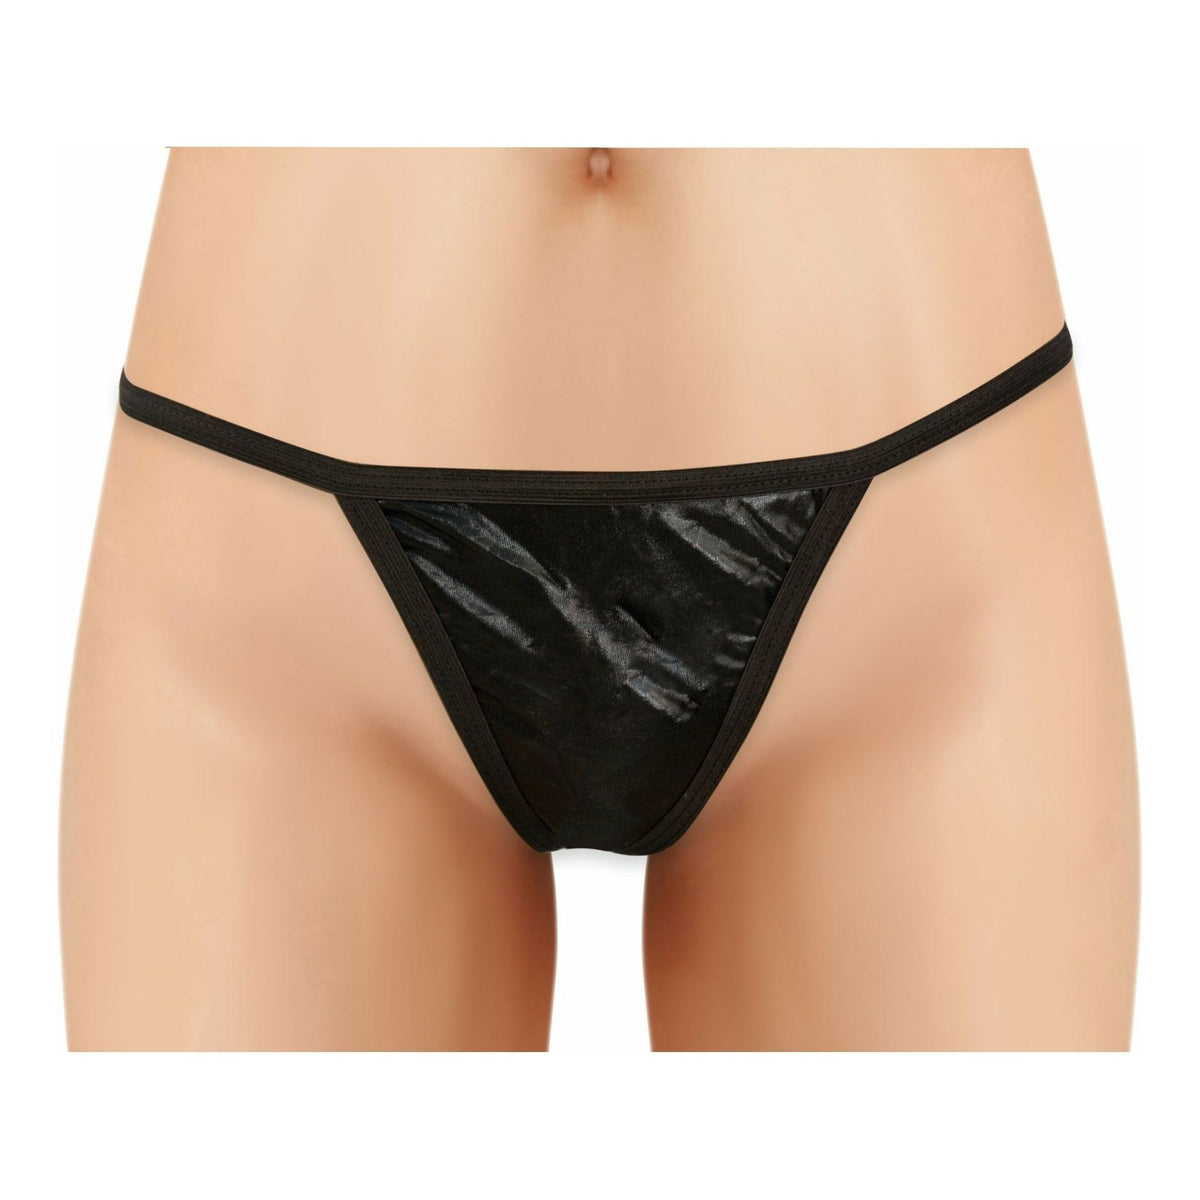 Wet Look Panty with Clasp Back - O/S